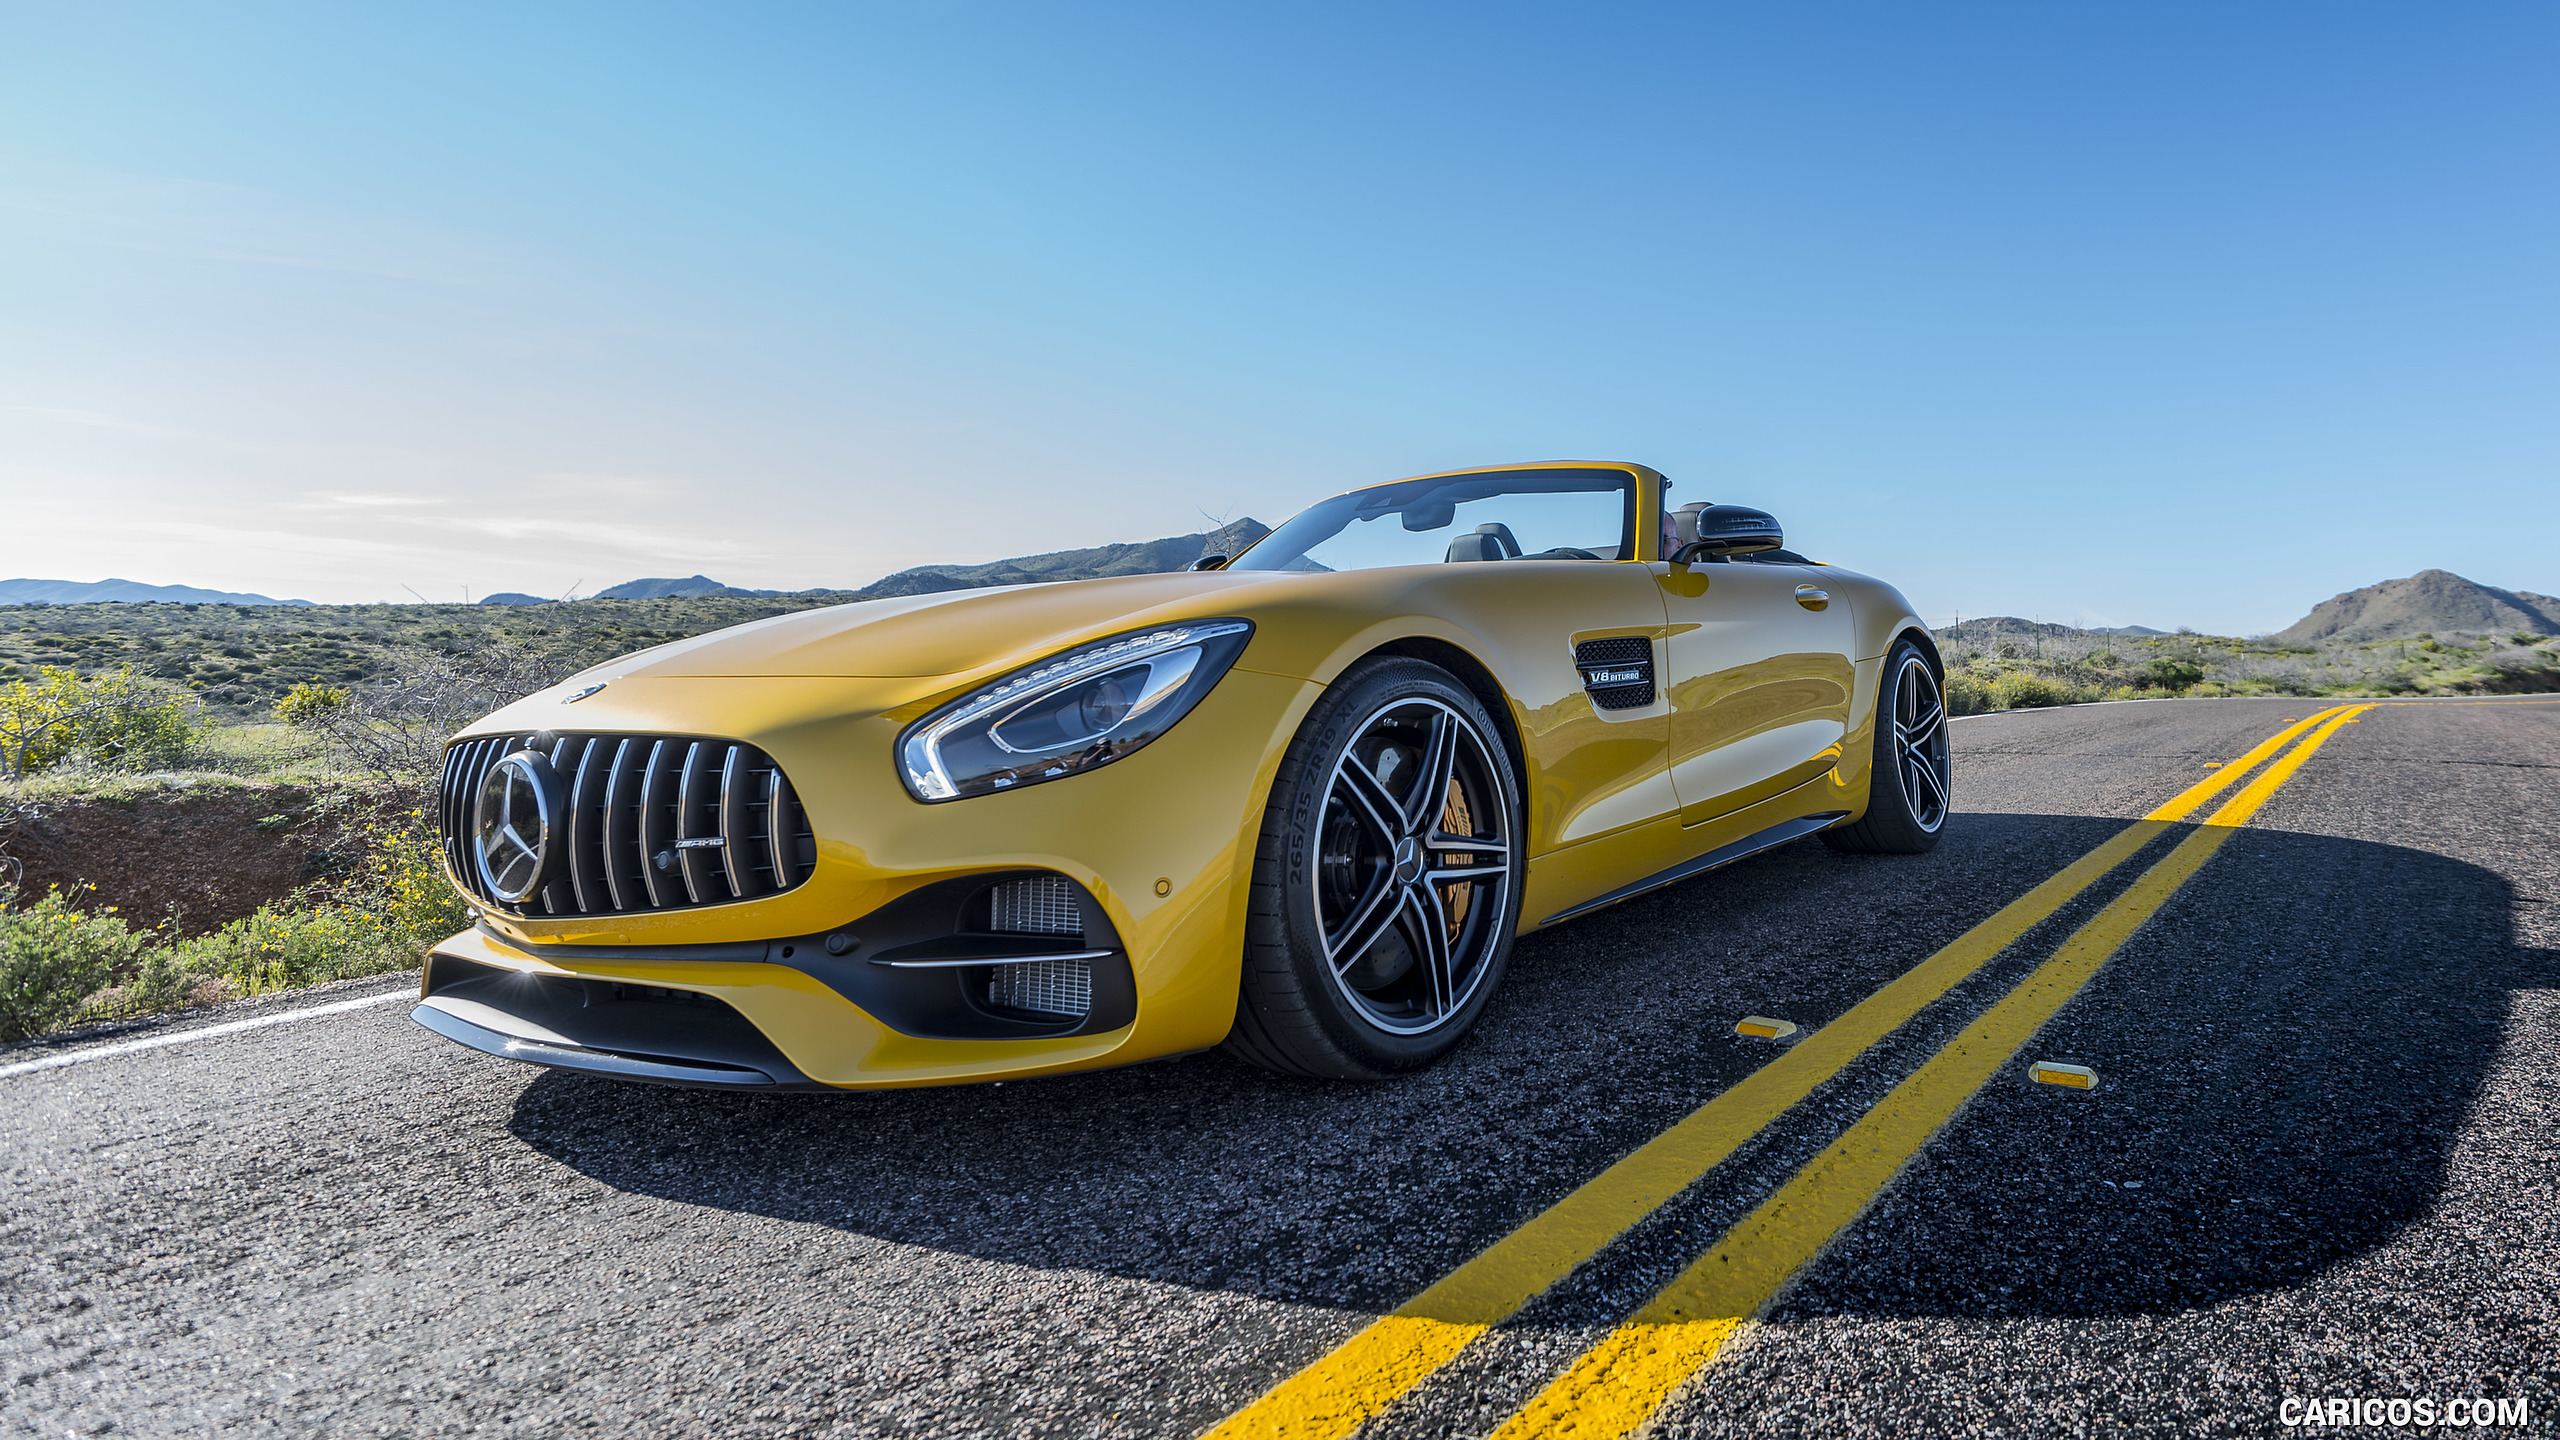 2018 Mercedes-AMG GT C Roadster - Front Three-Quarter, #230 of 350